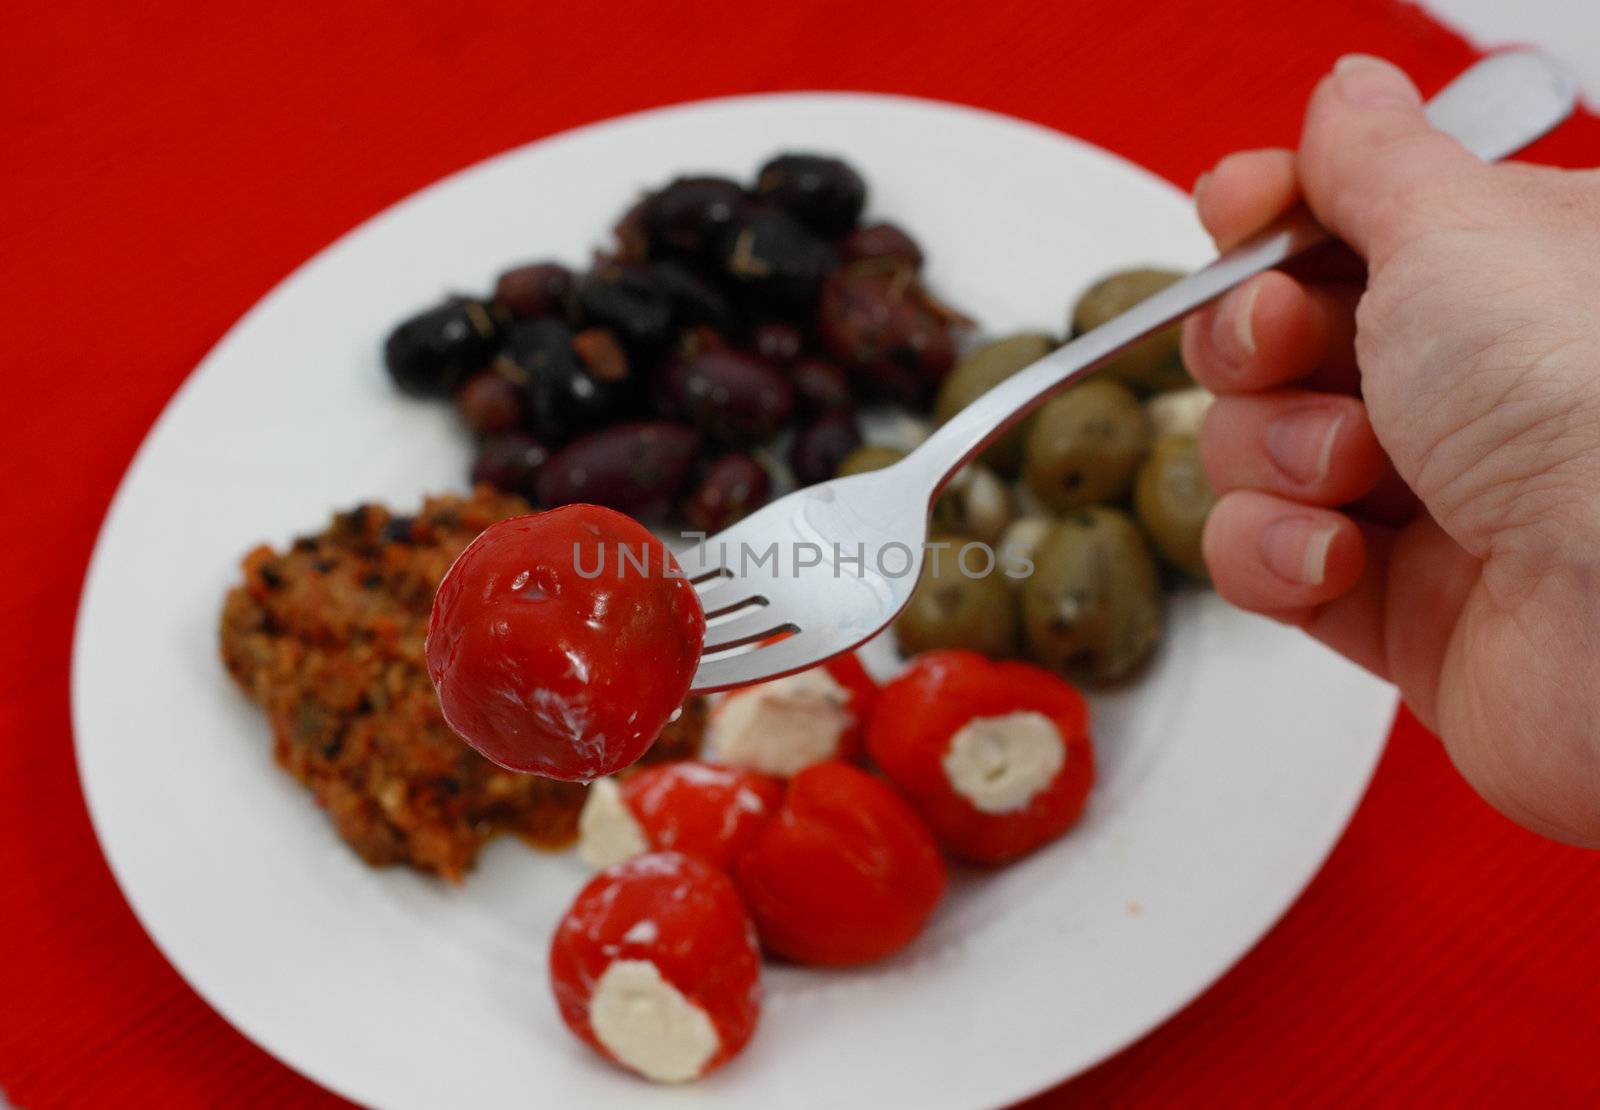  greek olives with garlic, Tapenade and sweet pepper with creamy cheese